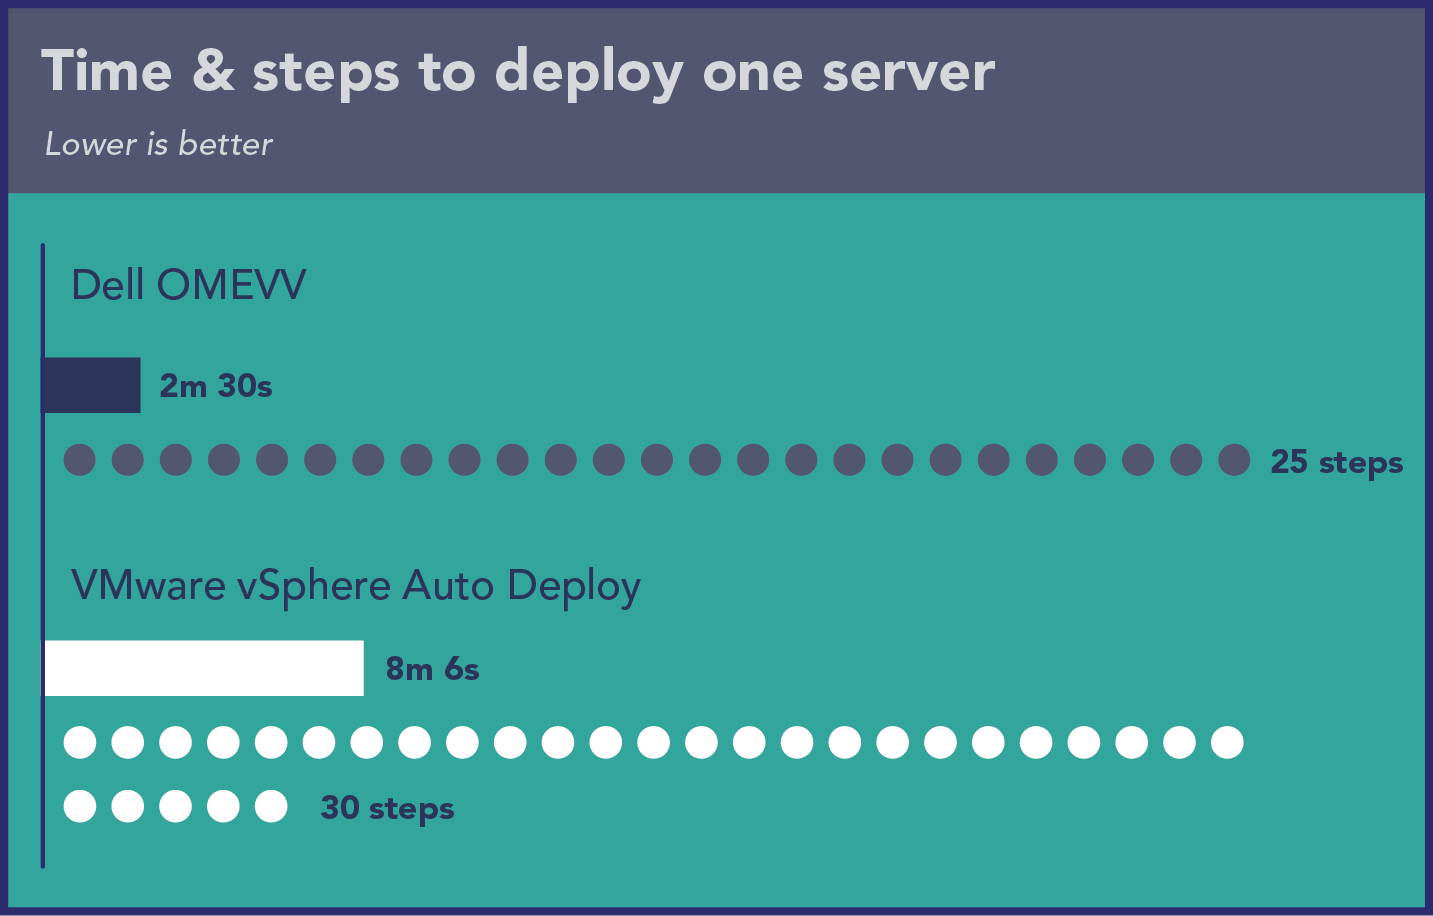 Chart of time and steps to deploy one server. Dell OMEVV shows 2 minutes 30 seconds and 25 steps. VMware vSphere Auto Deploy shows 8 minutes 6 seconds and 30 steps.